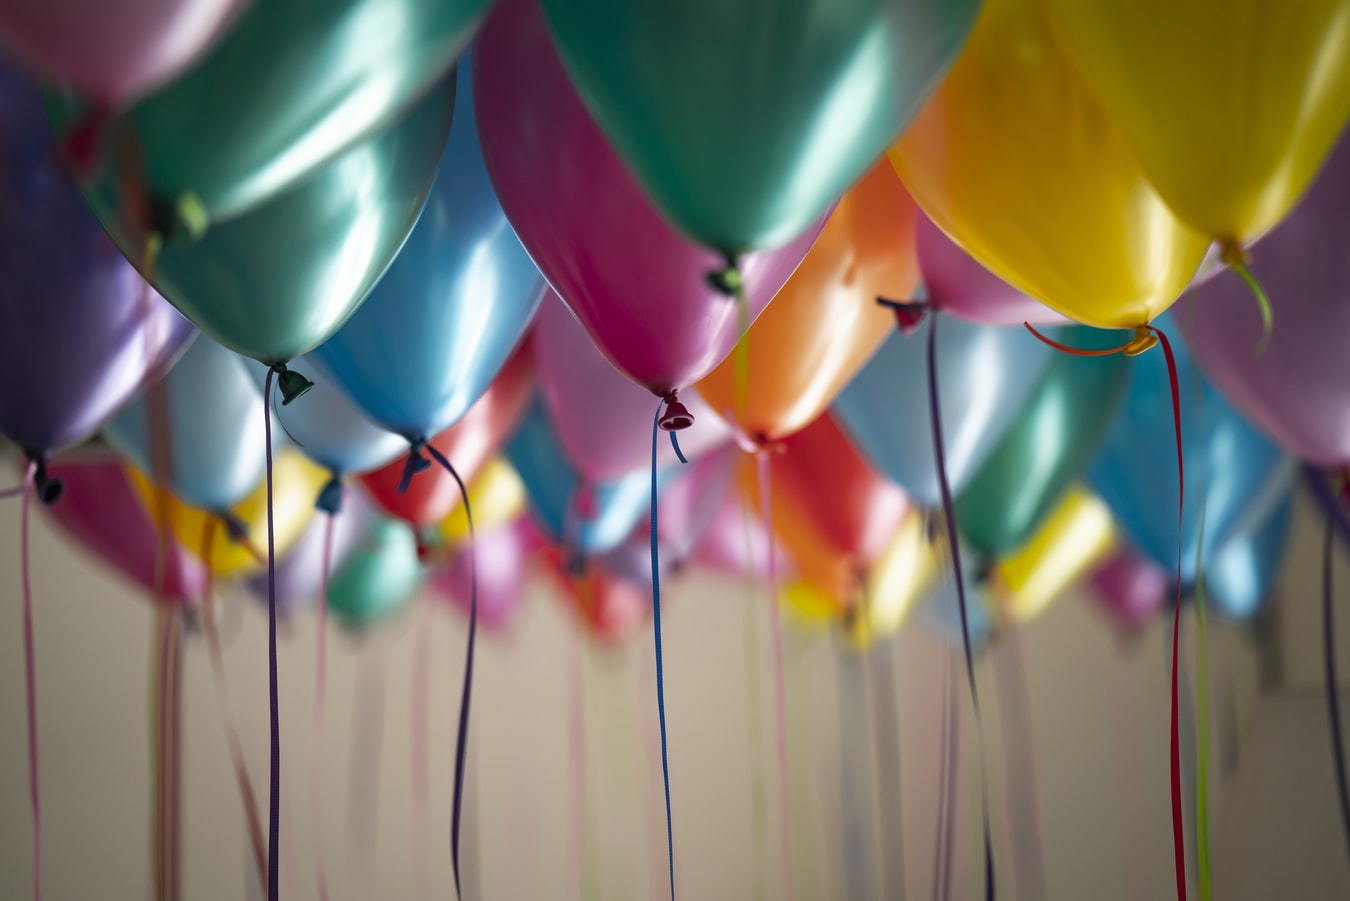 Balloons at a party. Parties and celebrations can sometimes cause relapse